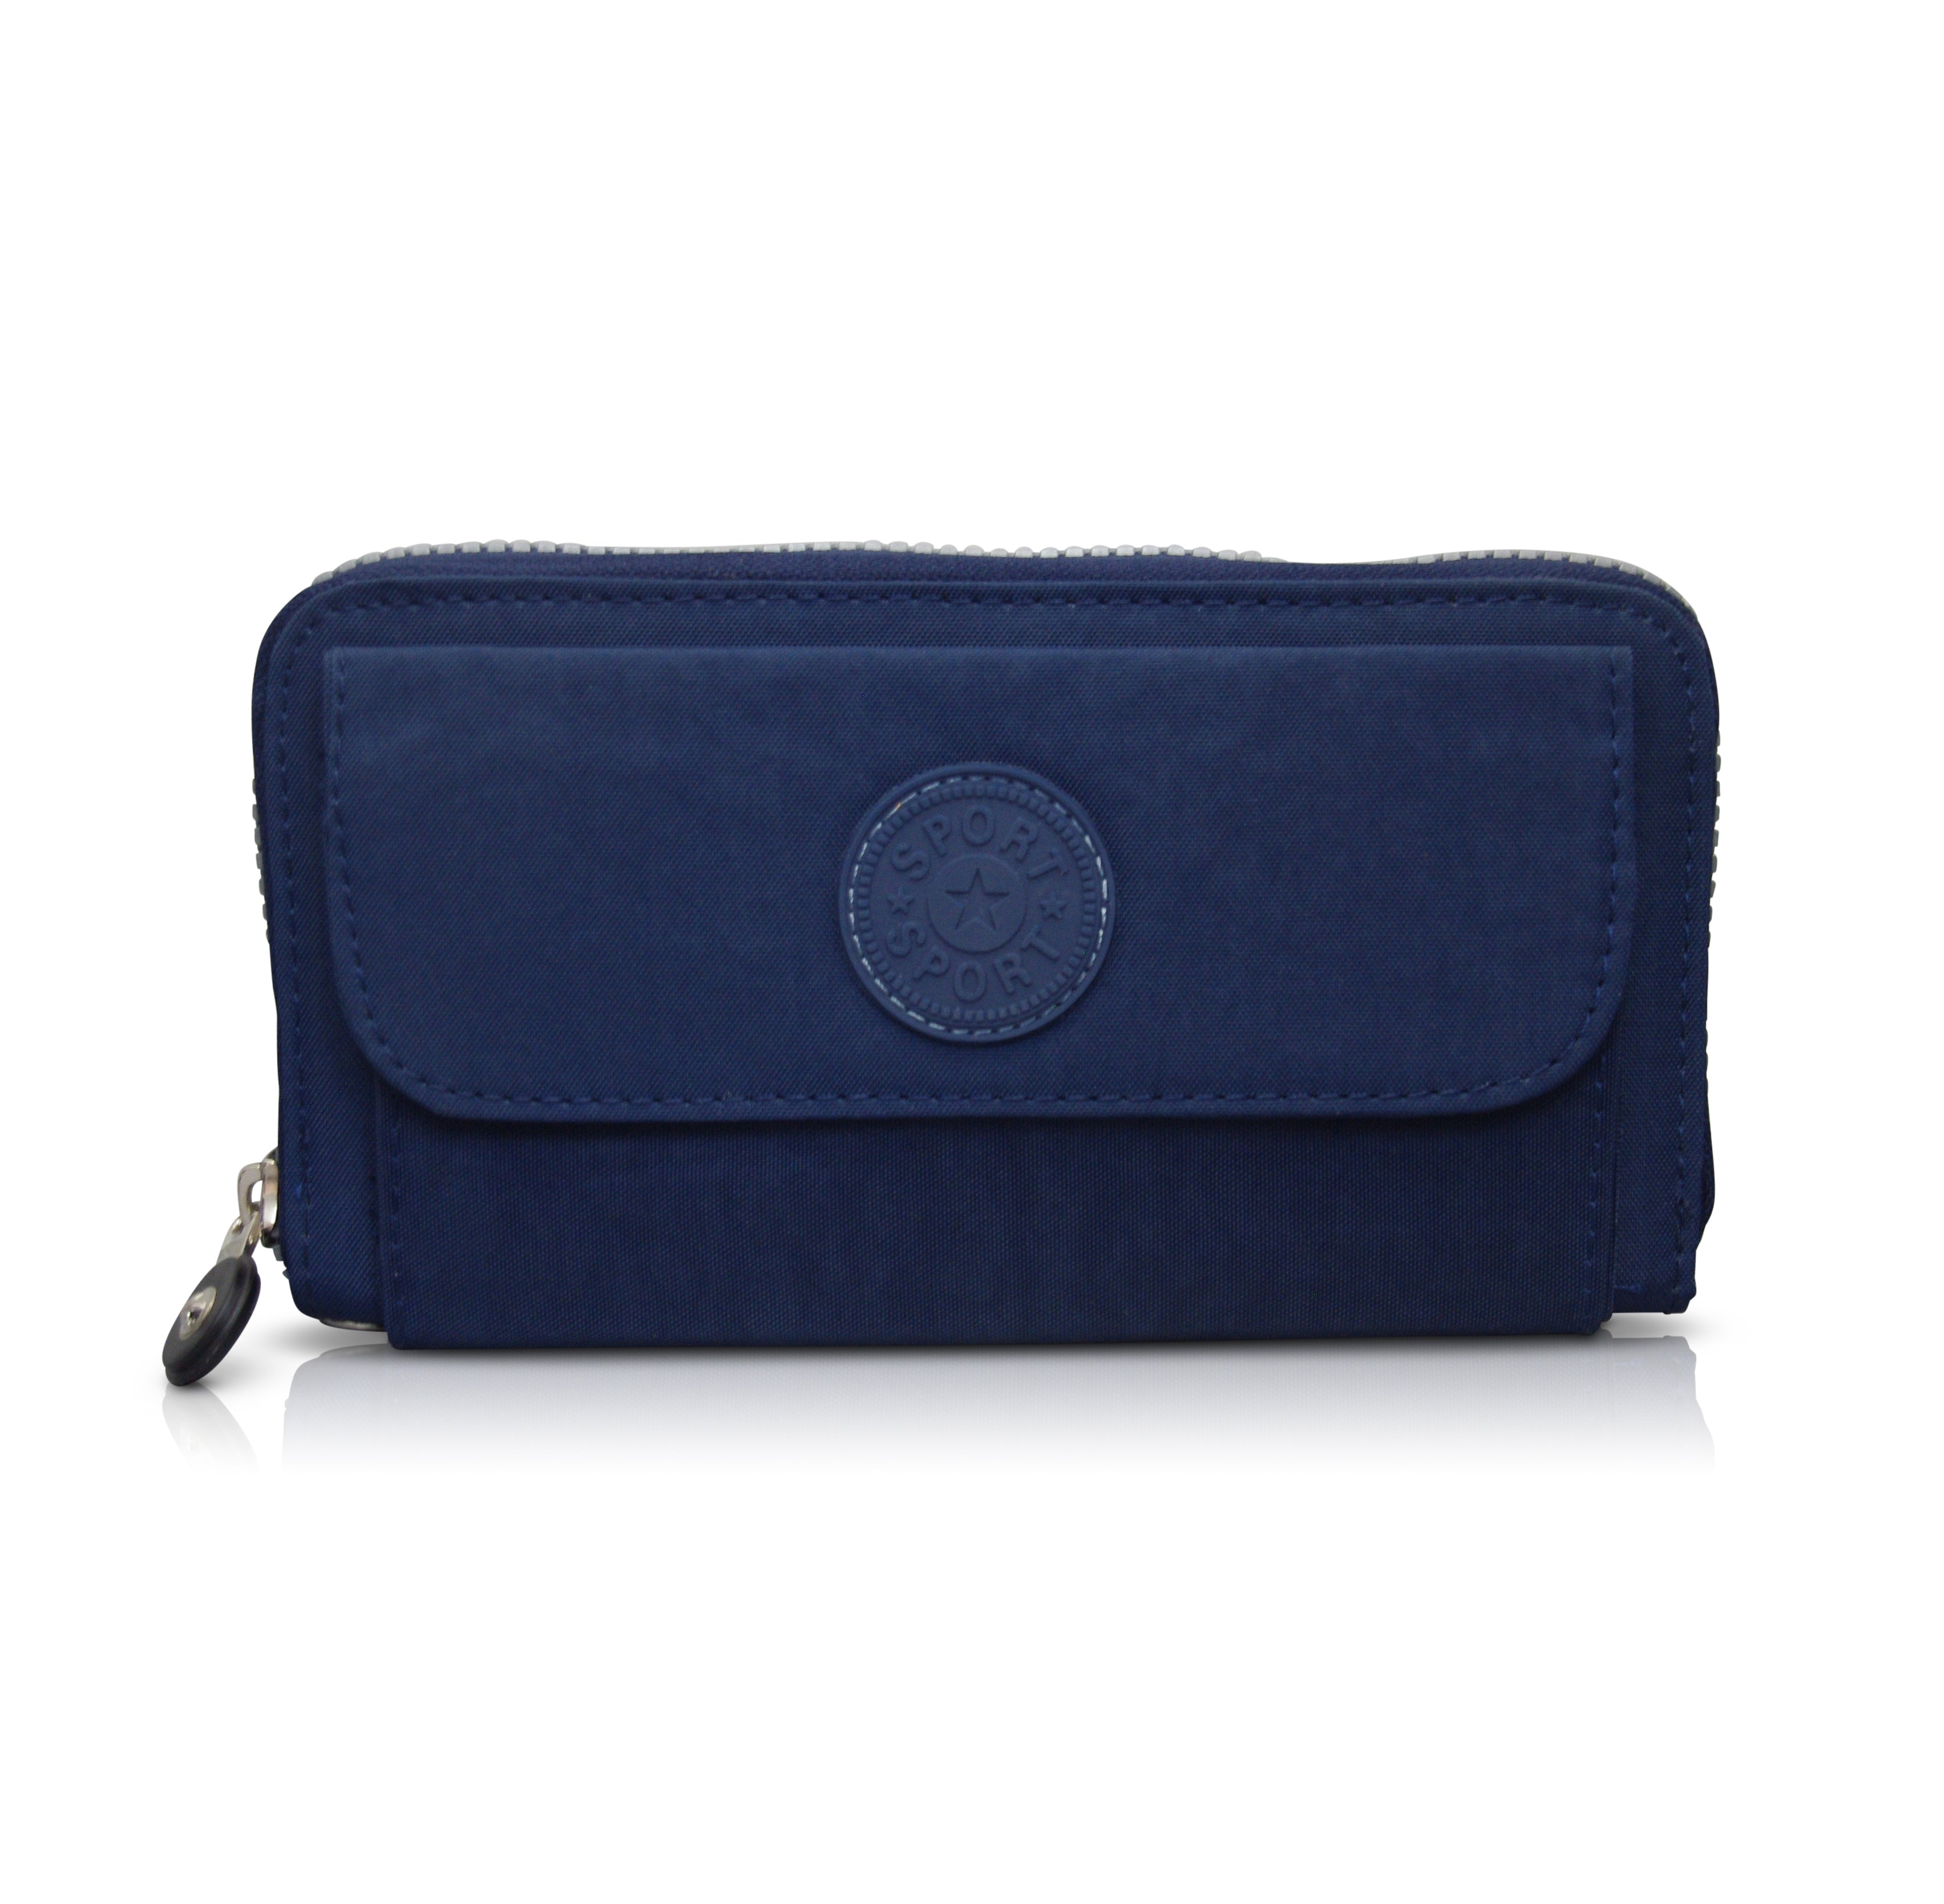 Cienna - KP19008 Large Zip Wallet with Phone Pouch - Navy